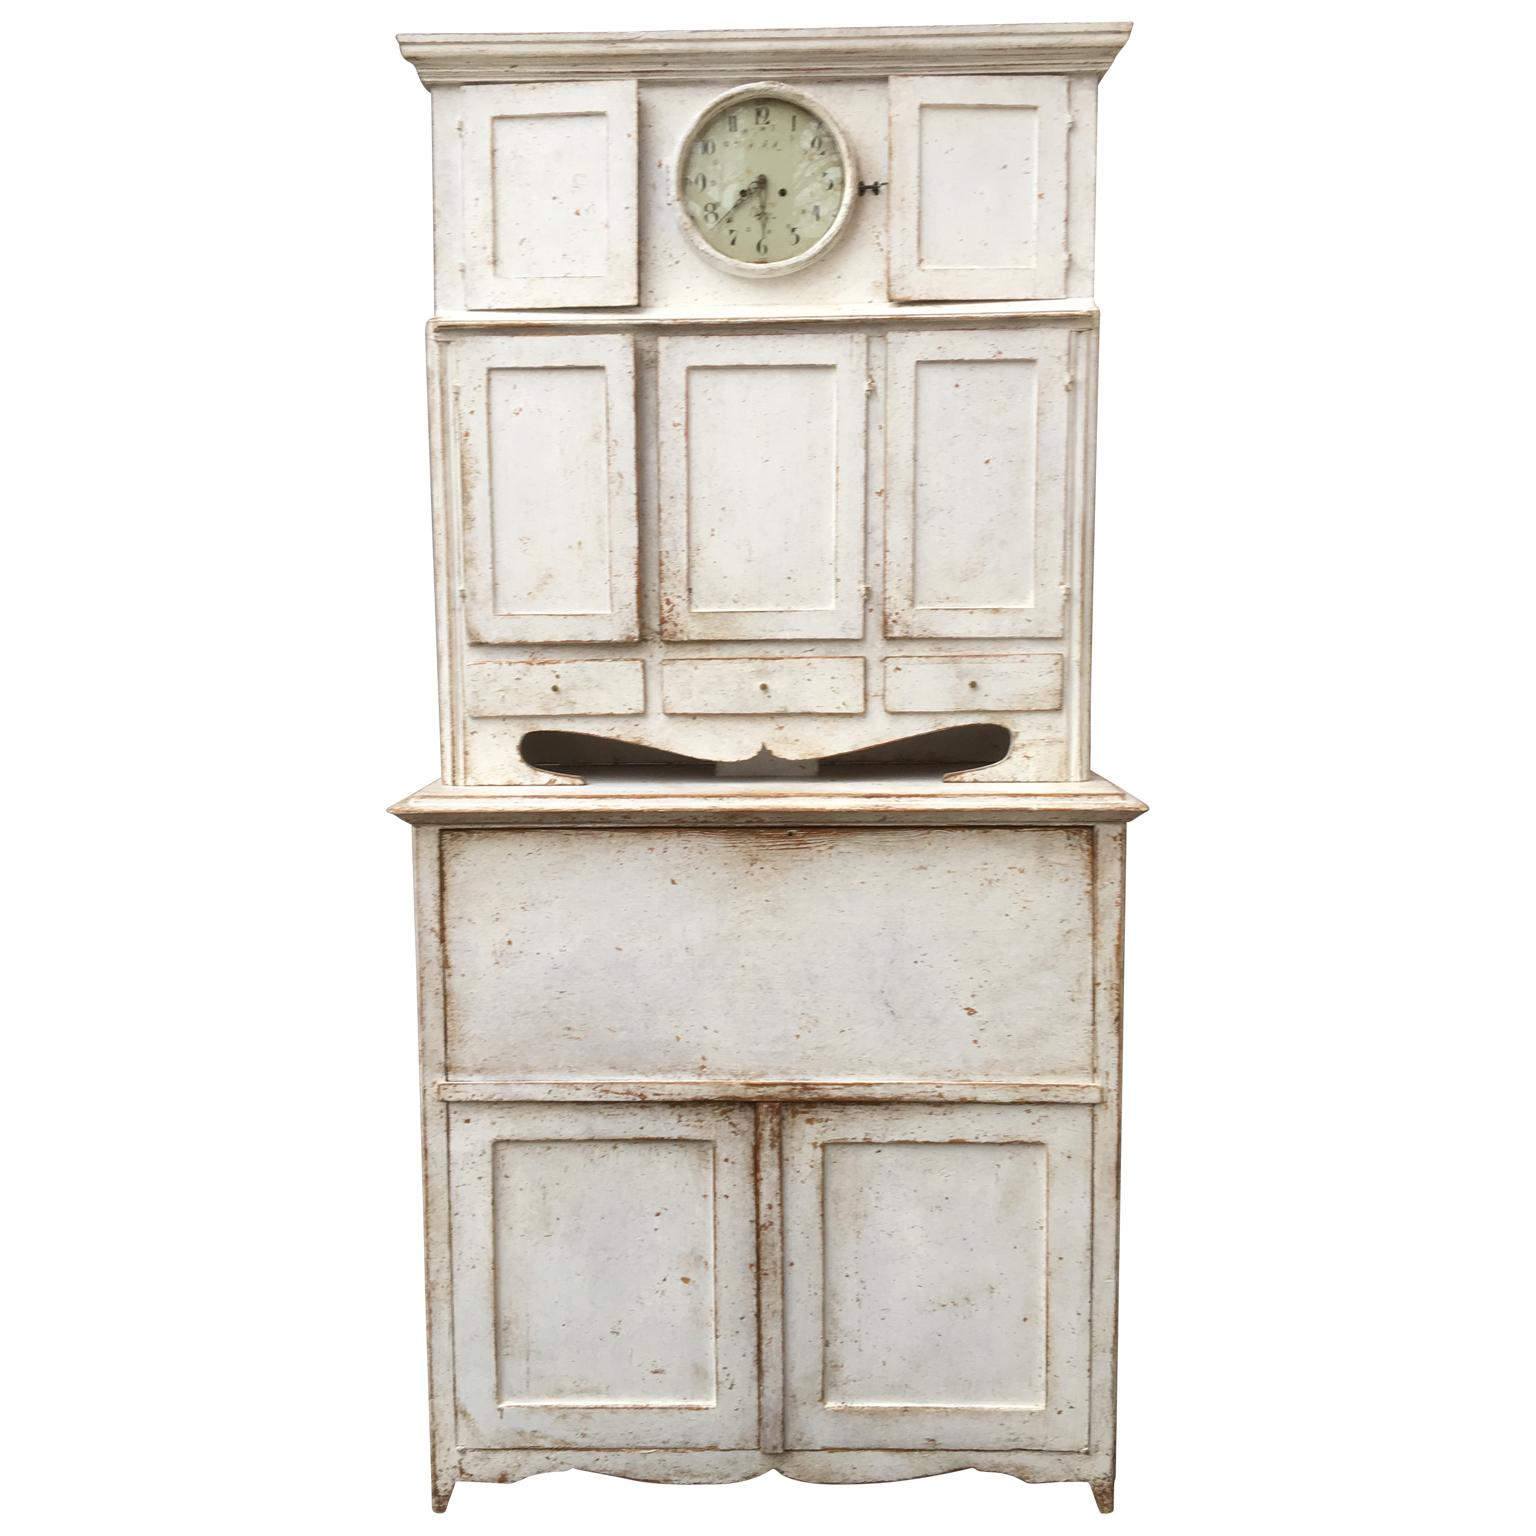 Swedish light gray Gustavian clock cupboard with drop-front desk, circa 1810.

Clock complete with pendulum and weights. Working mechanism, however not tested. Cabinet built in 2 parts for easier handling.

We offer low cost front door delivery to